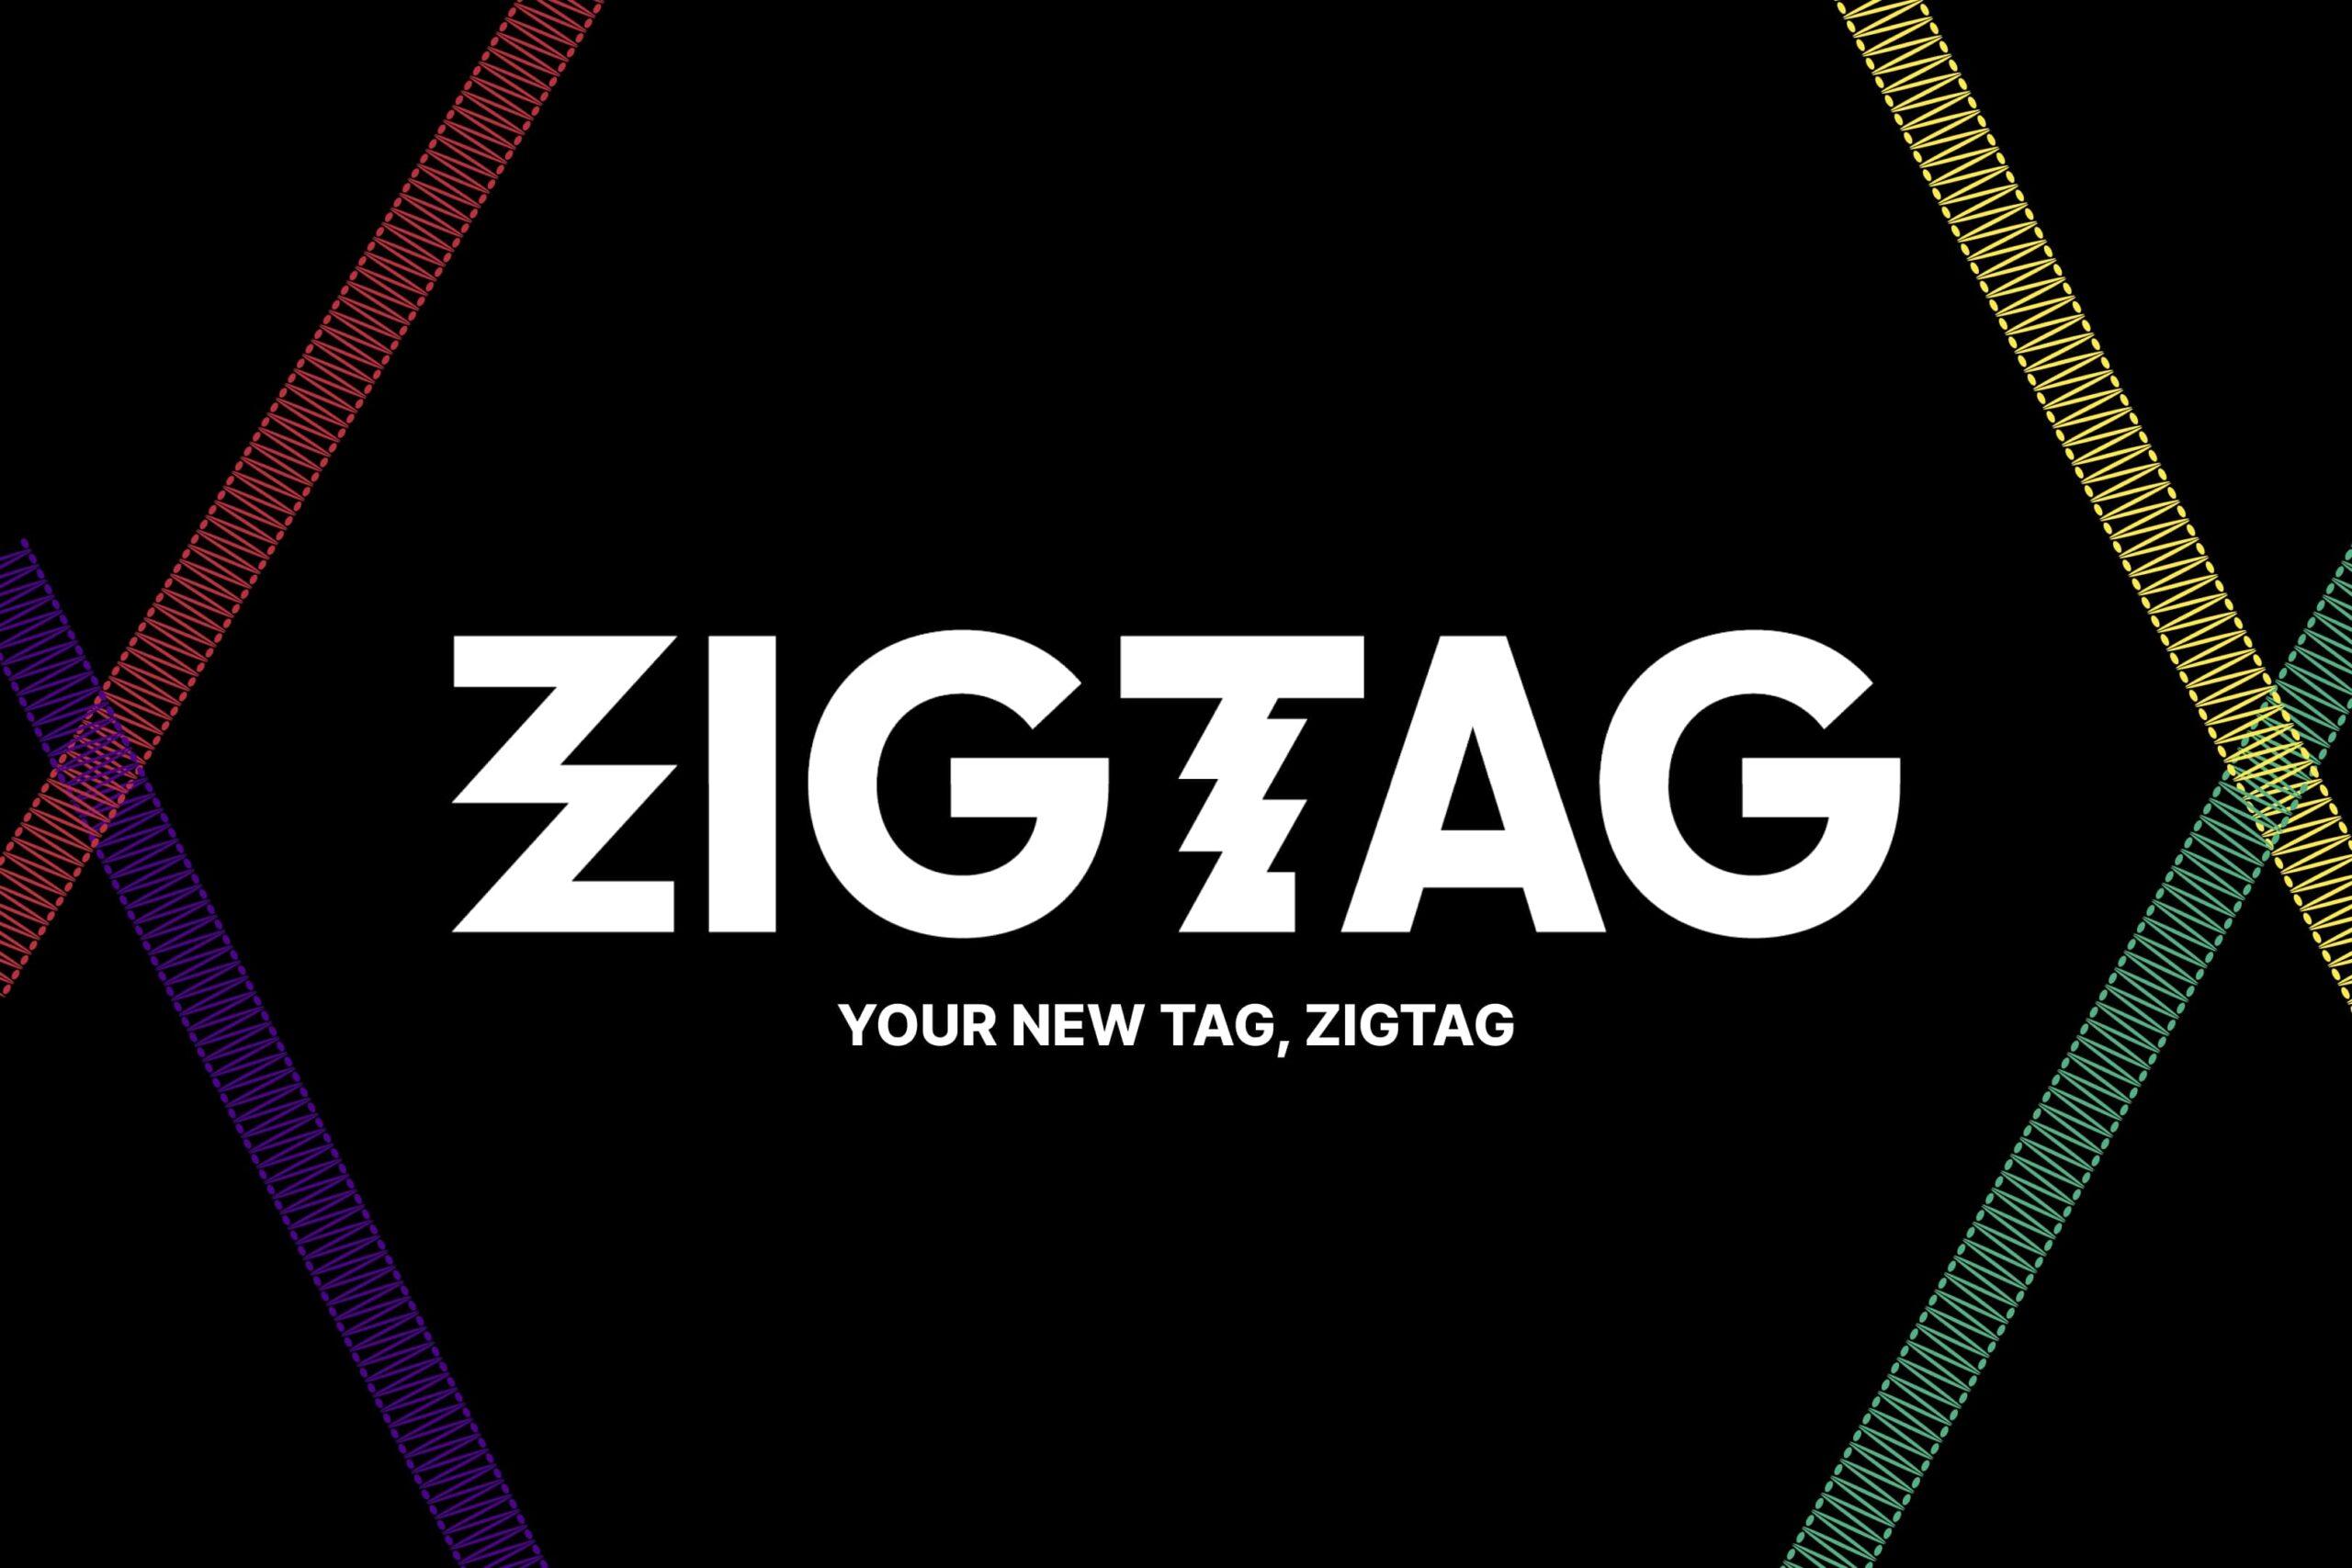 zigtag by signature label fashionable k-beauty products